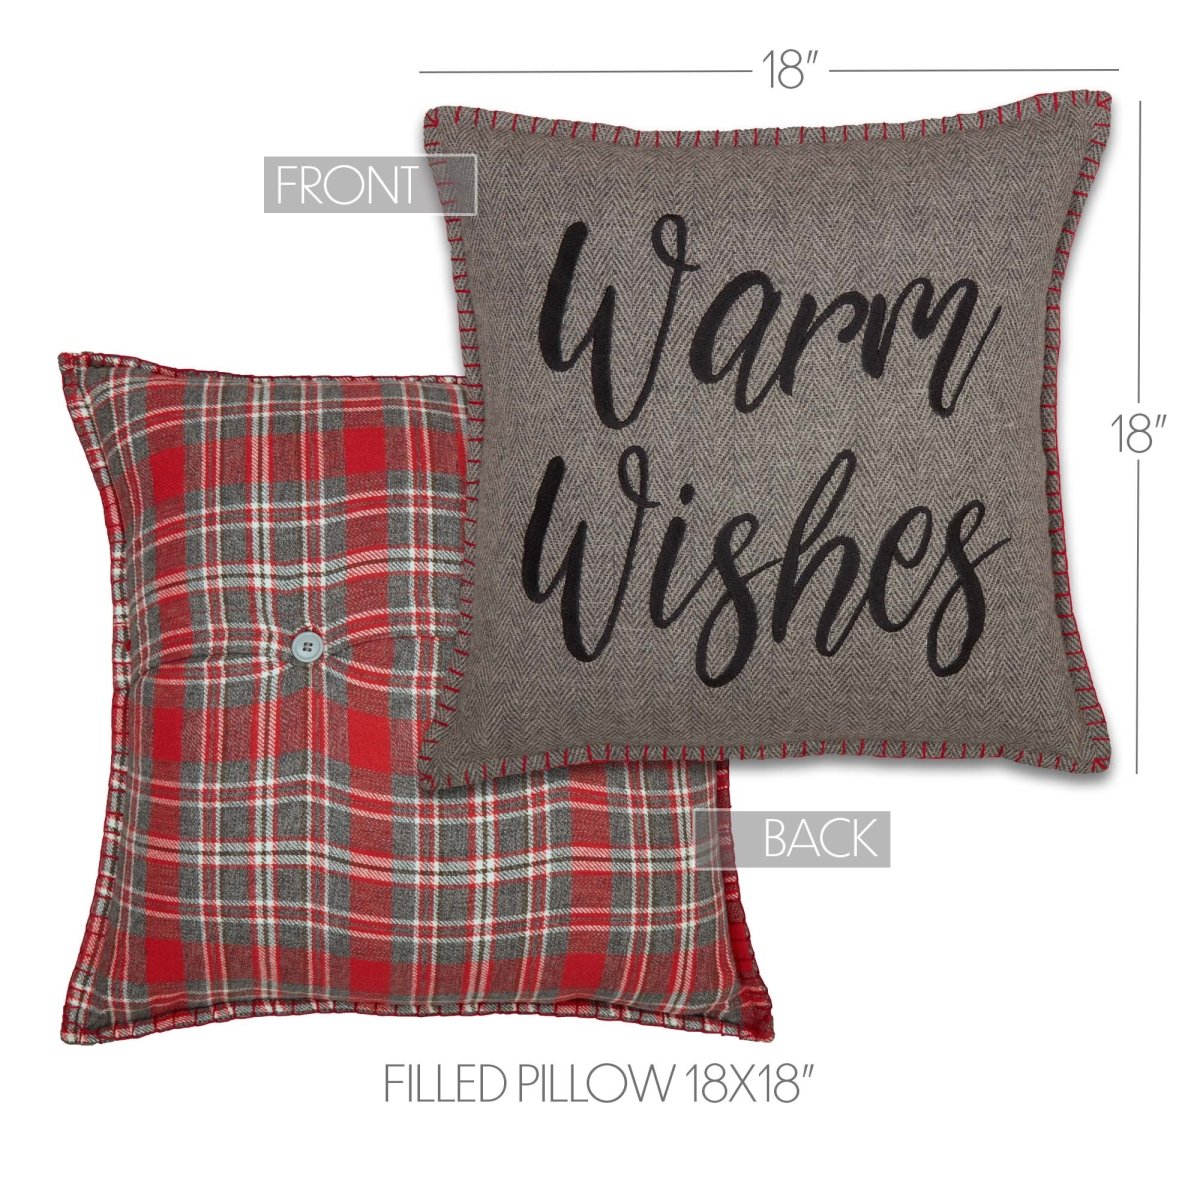 Anderson Warm Wishes Pillow 18x18